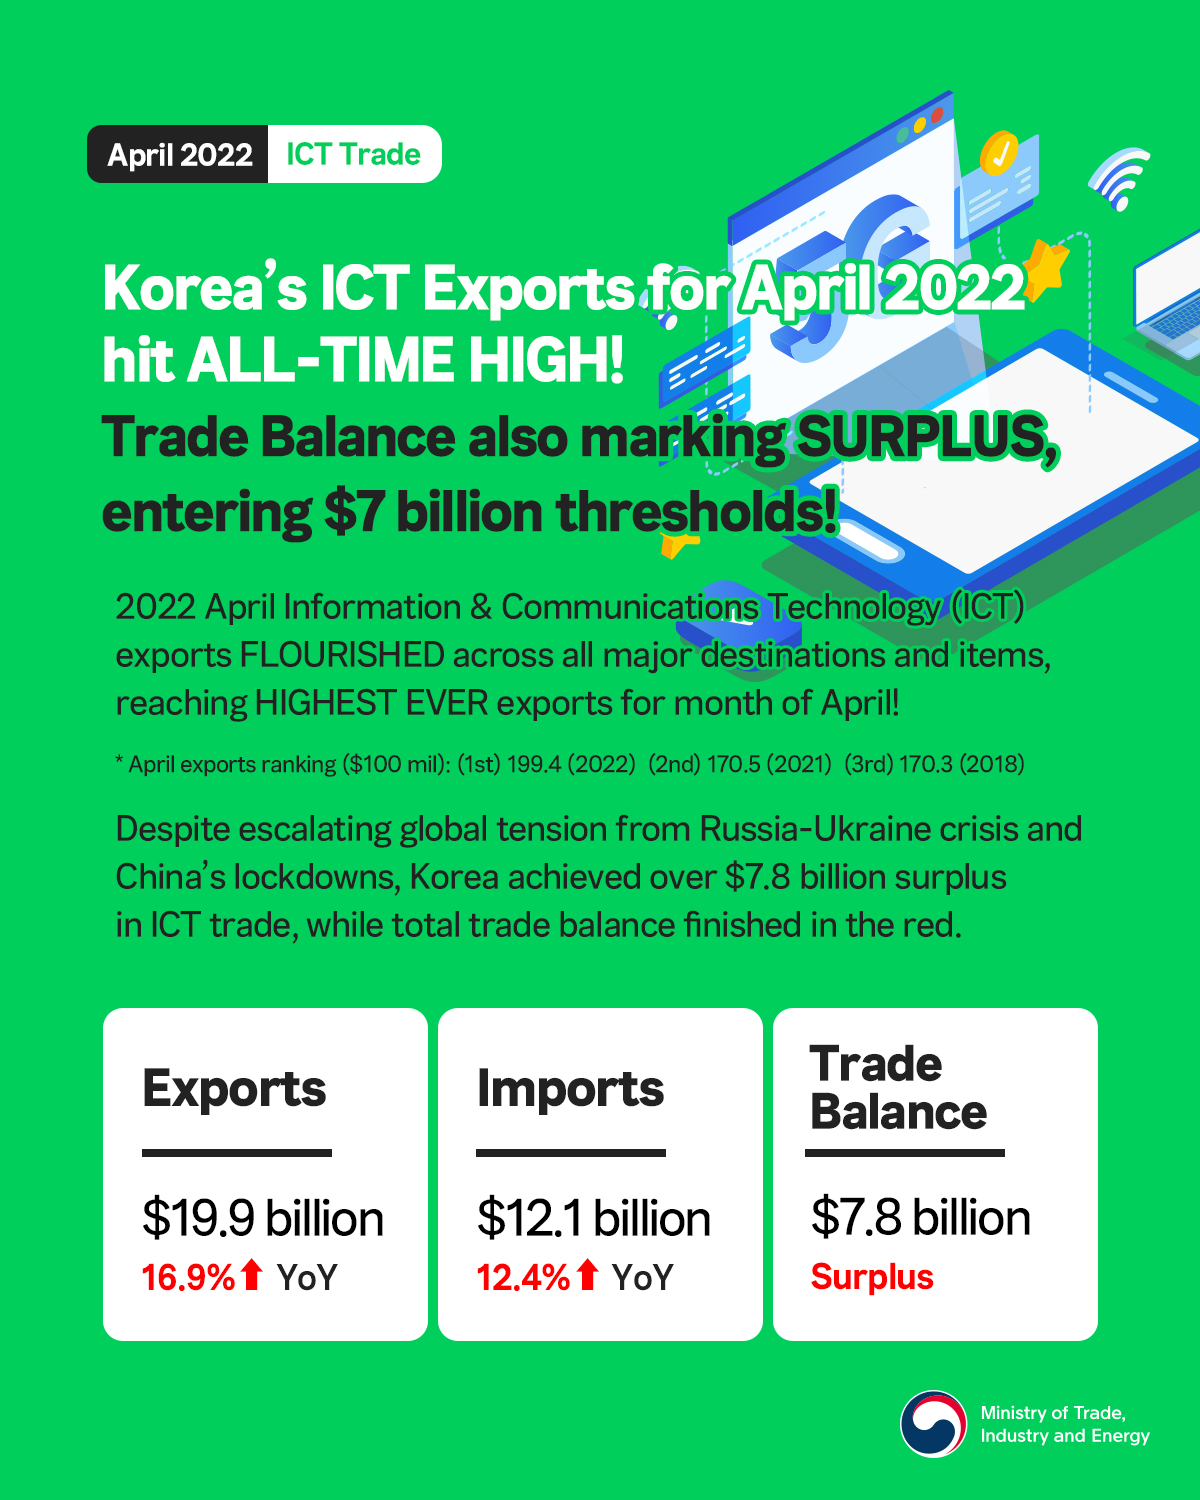 Korea’s ICT exports hit all-time high of $19.9 billion in April! Image 0